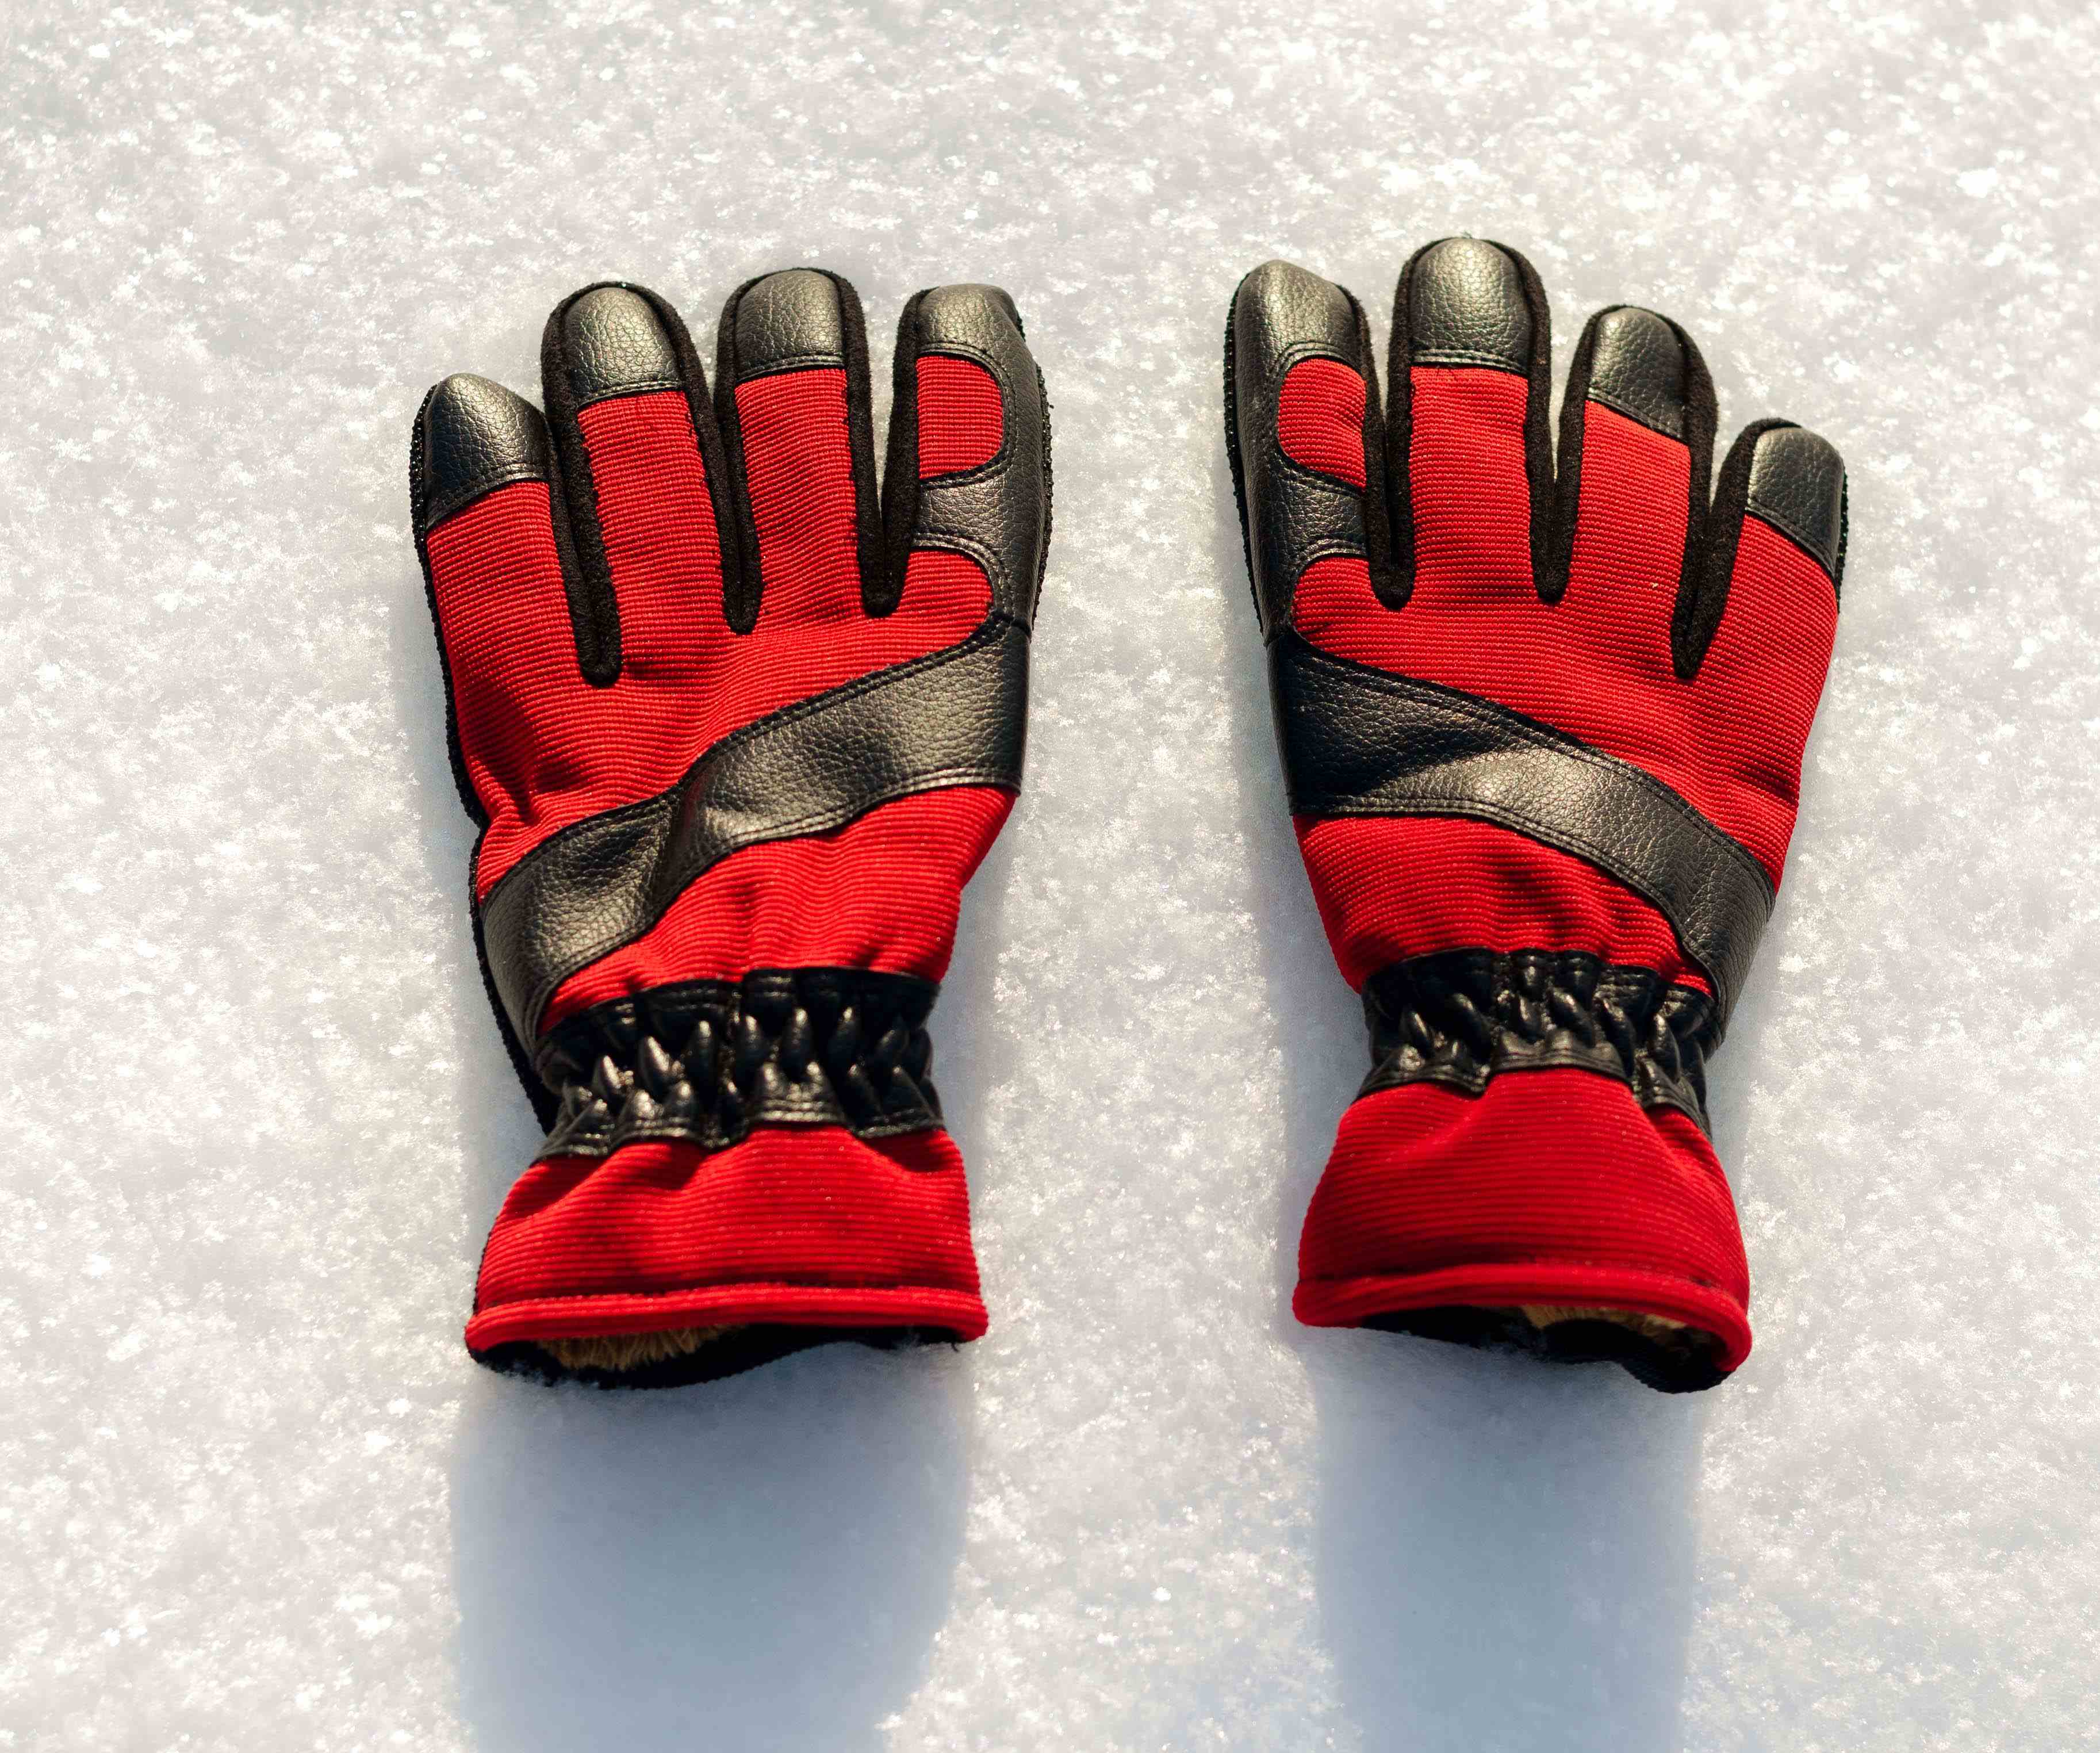 The 8 Best Waterproof Gloves for Kids & Buying Guide 2021